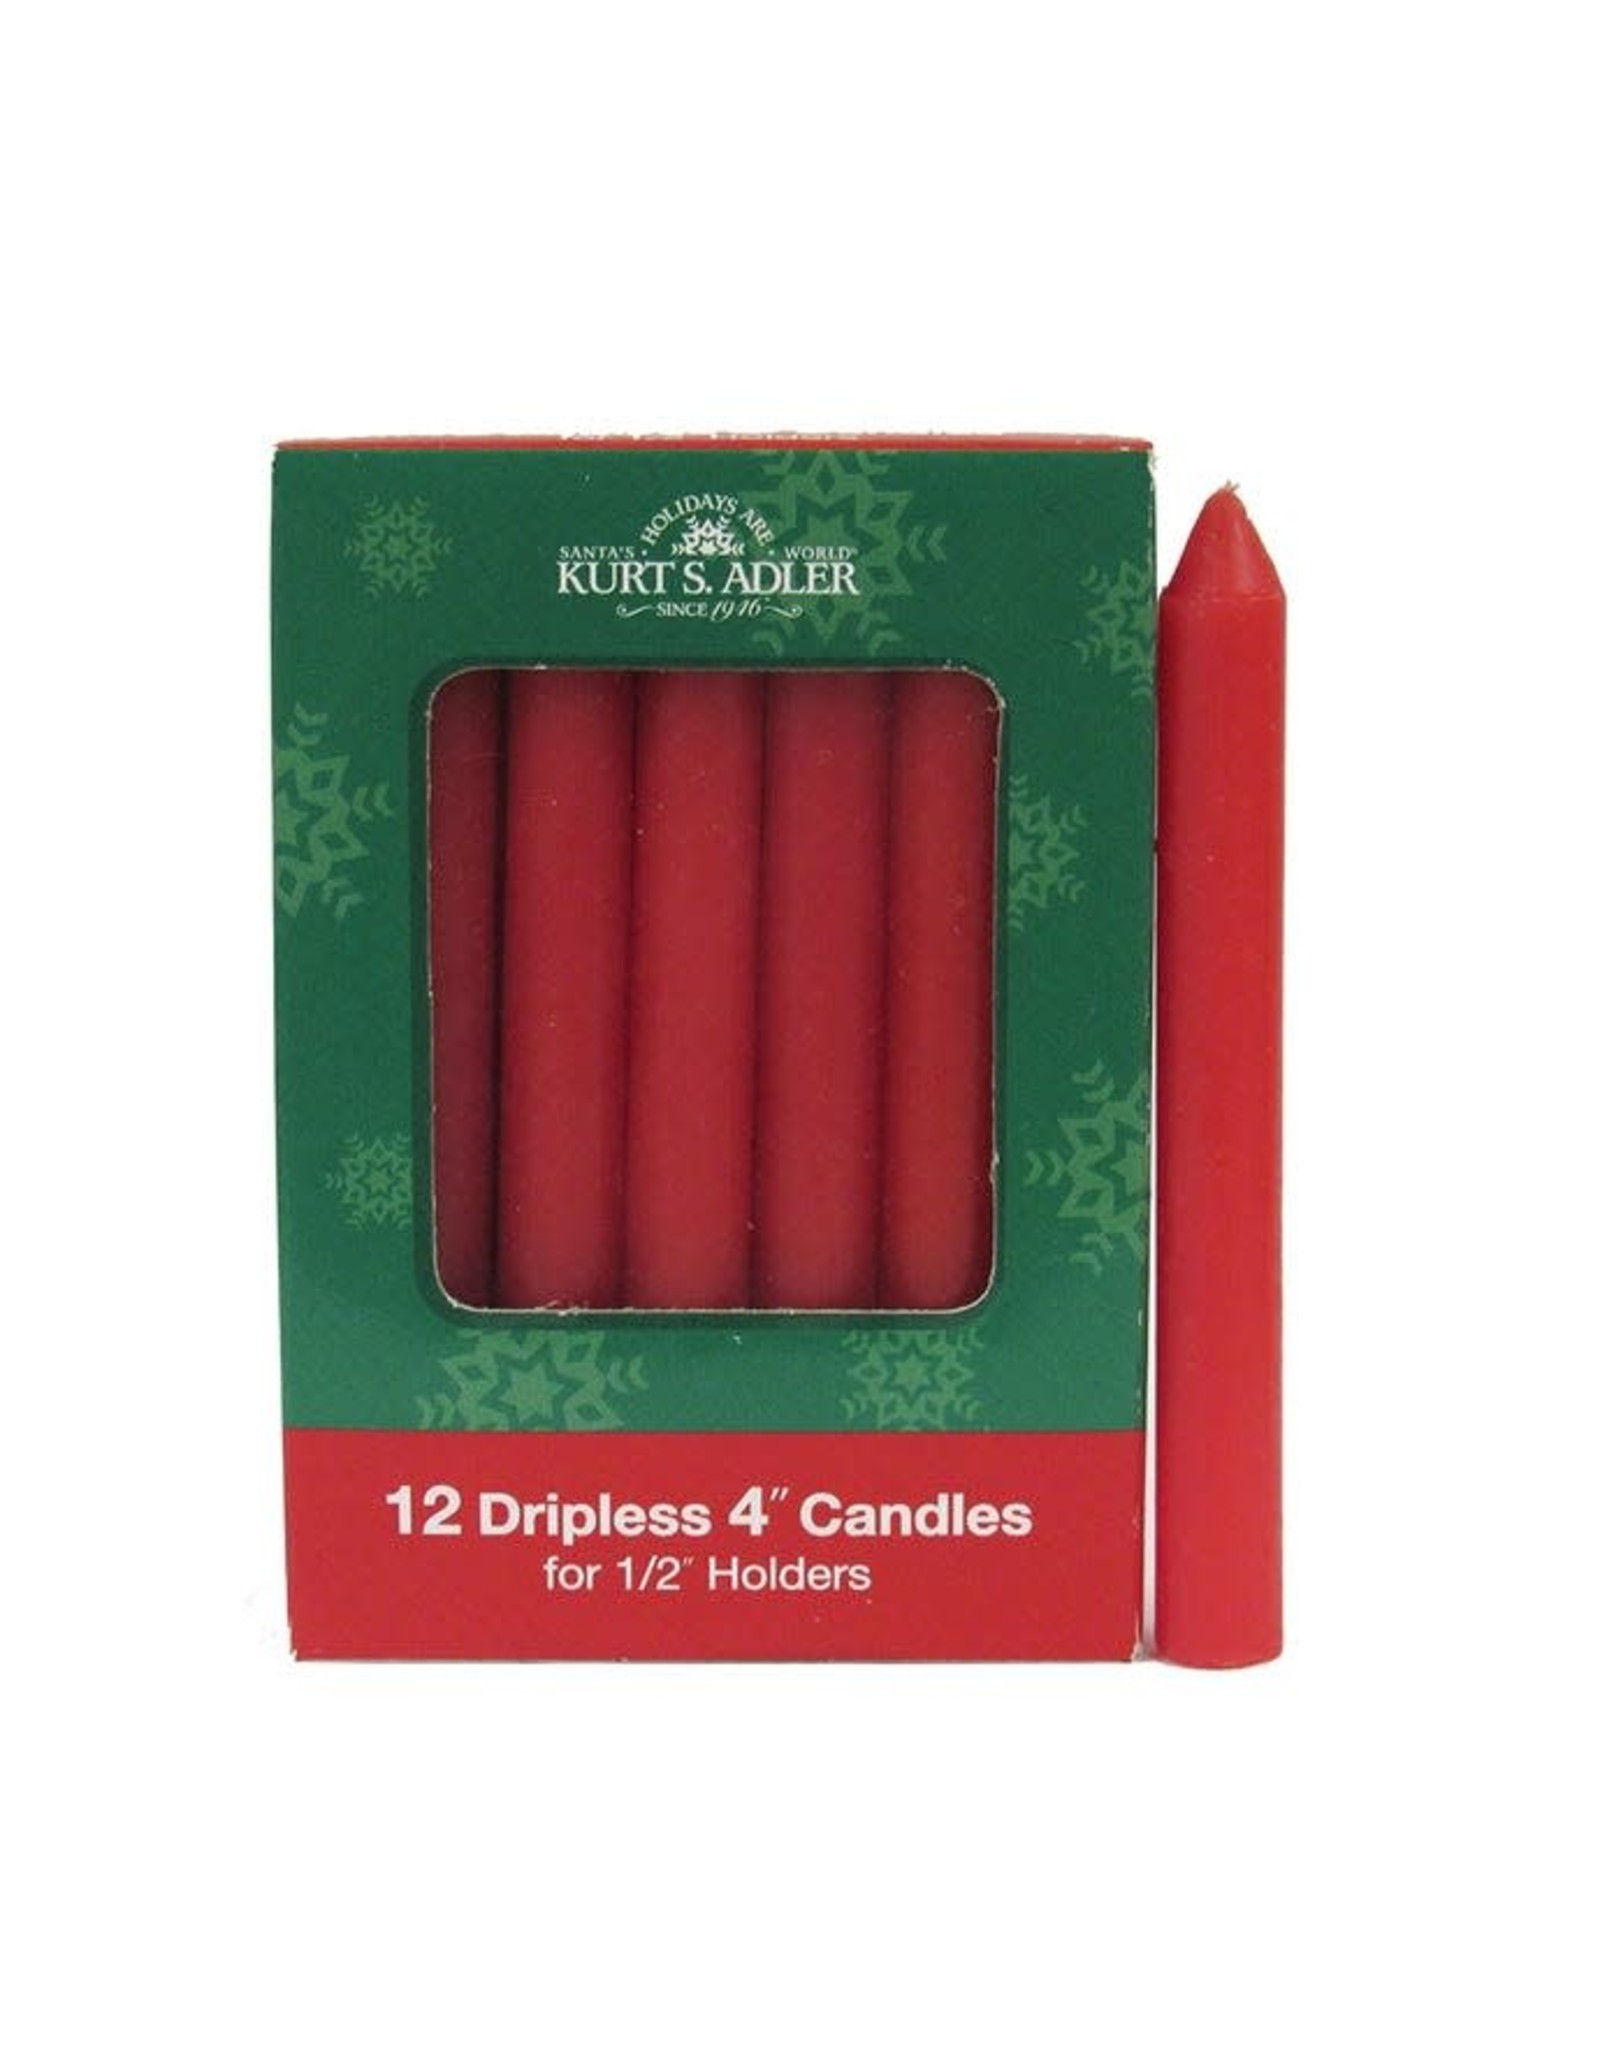 Kurt Adler Red Dripless Candle Set of 12 for 1/2 inch Holders